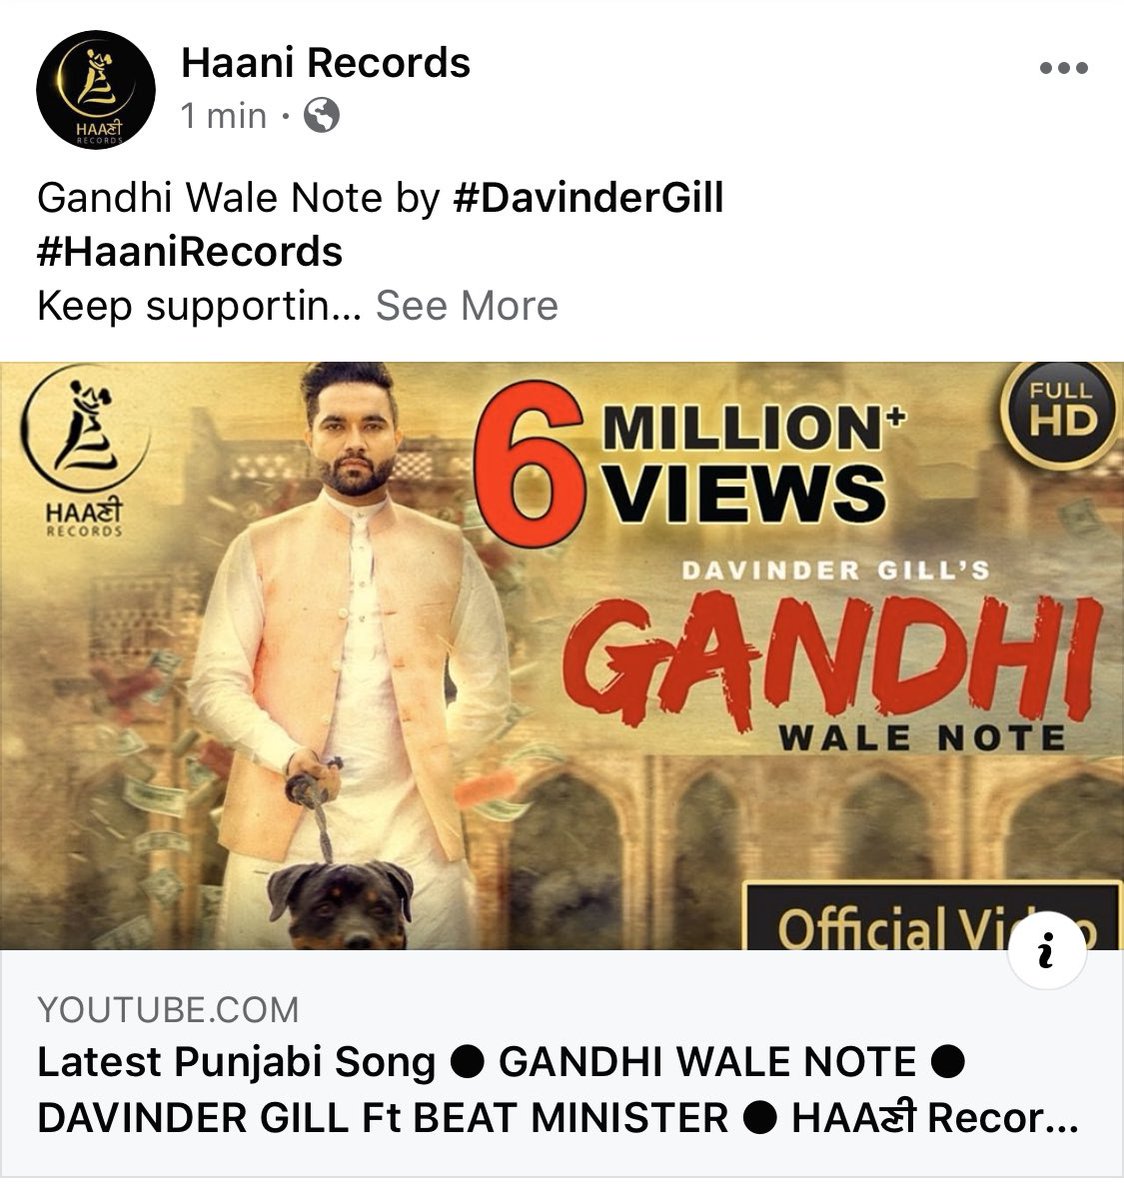 Gandhi Wale Note by #DavinderGill 
#HaaniRecords 
Keep supporting & share it 
youtu.be/OTyL-tzmzGc